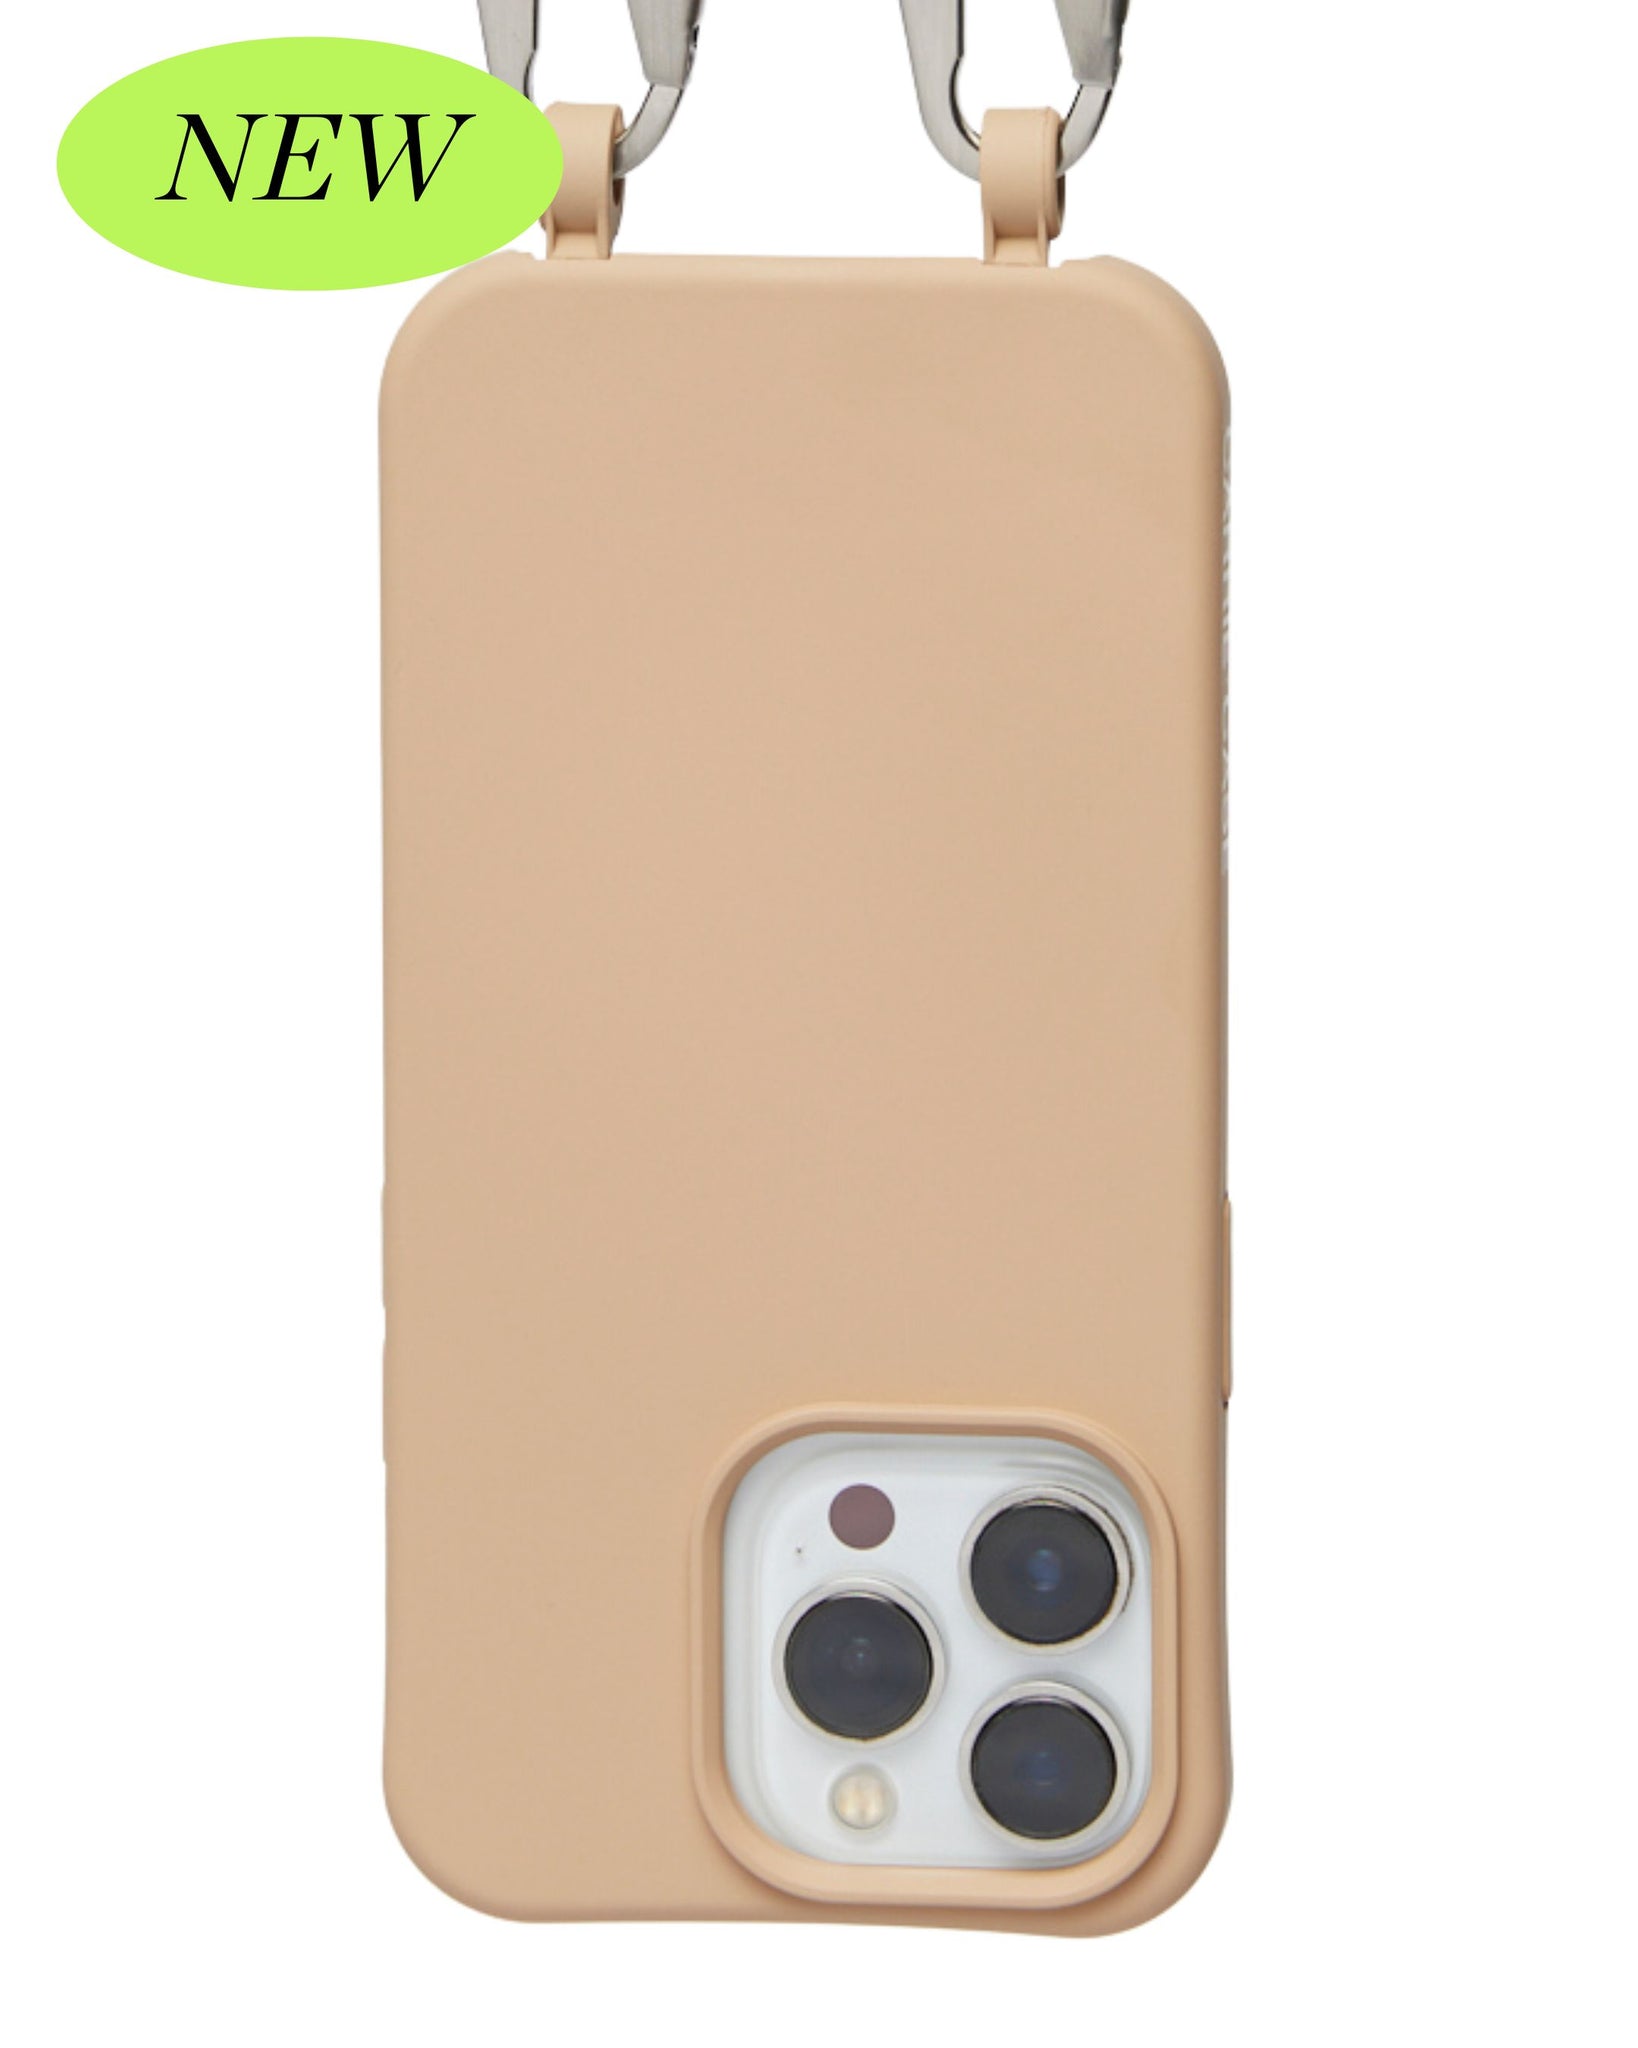 CARRIE CASE / FLEXI PAPERBARK / IPHONE CASE + EYELETS / NEW MATERIAL